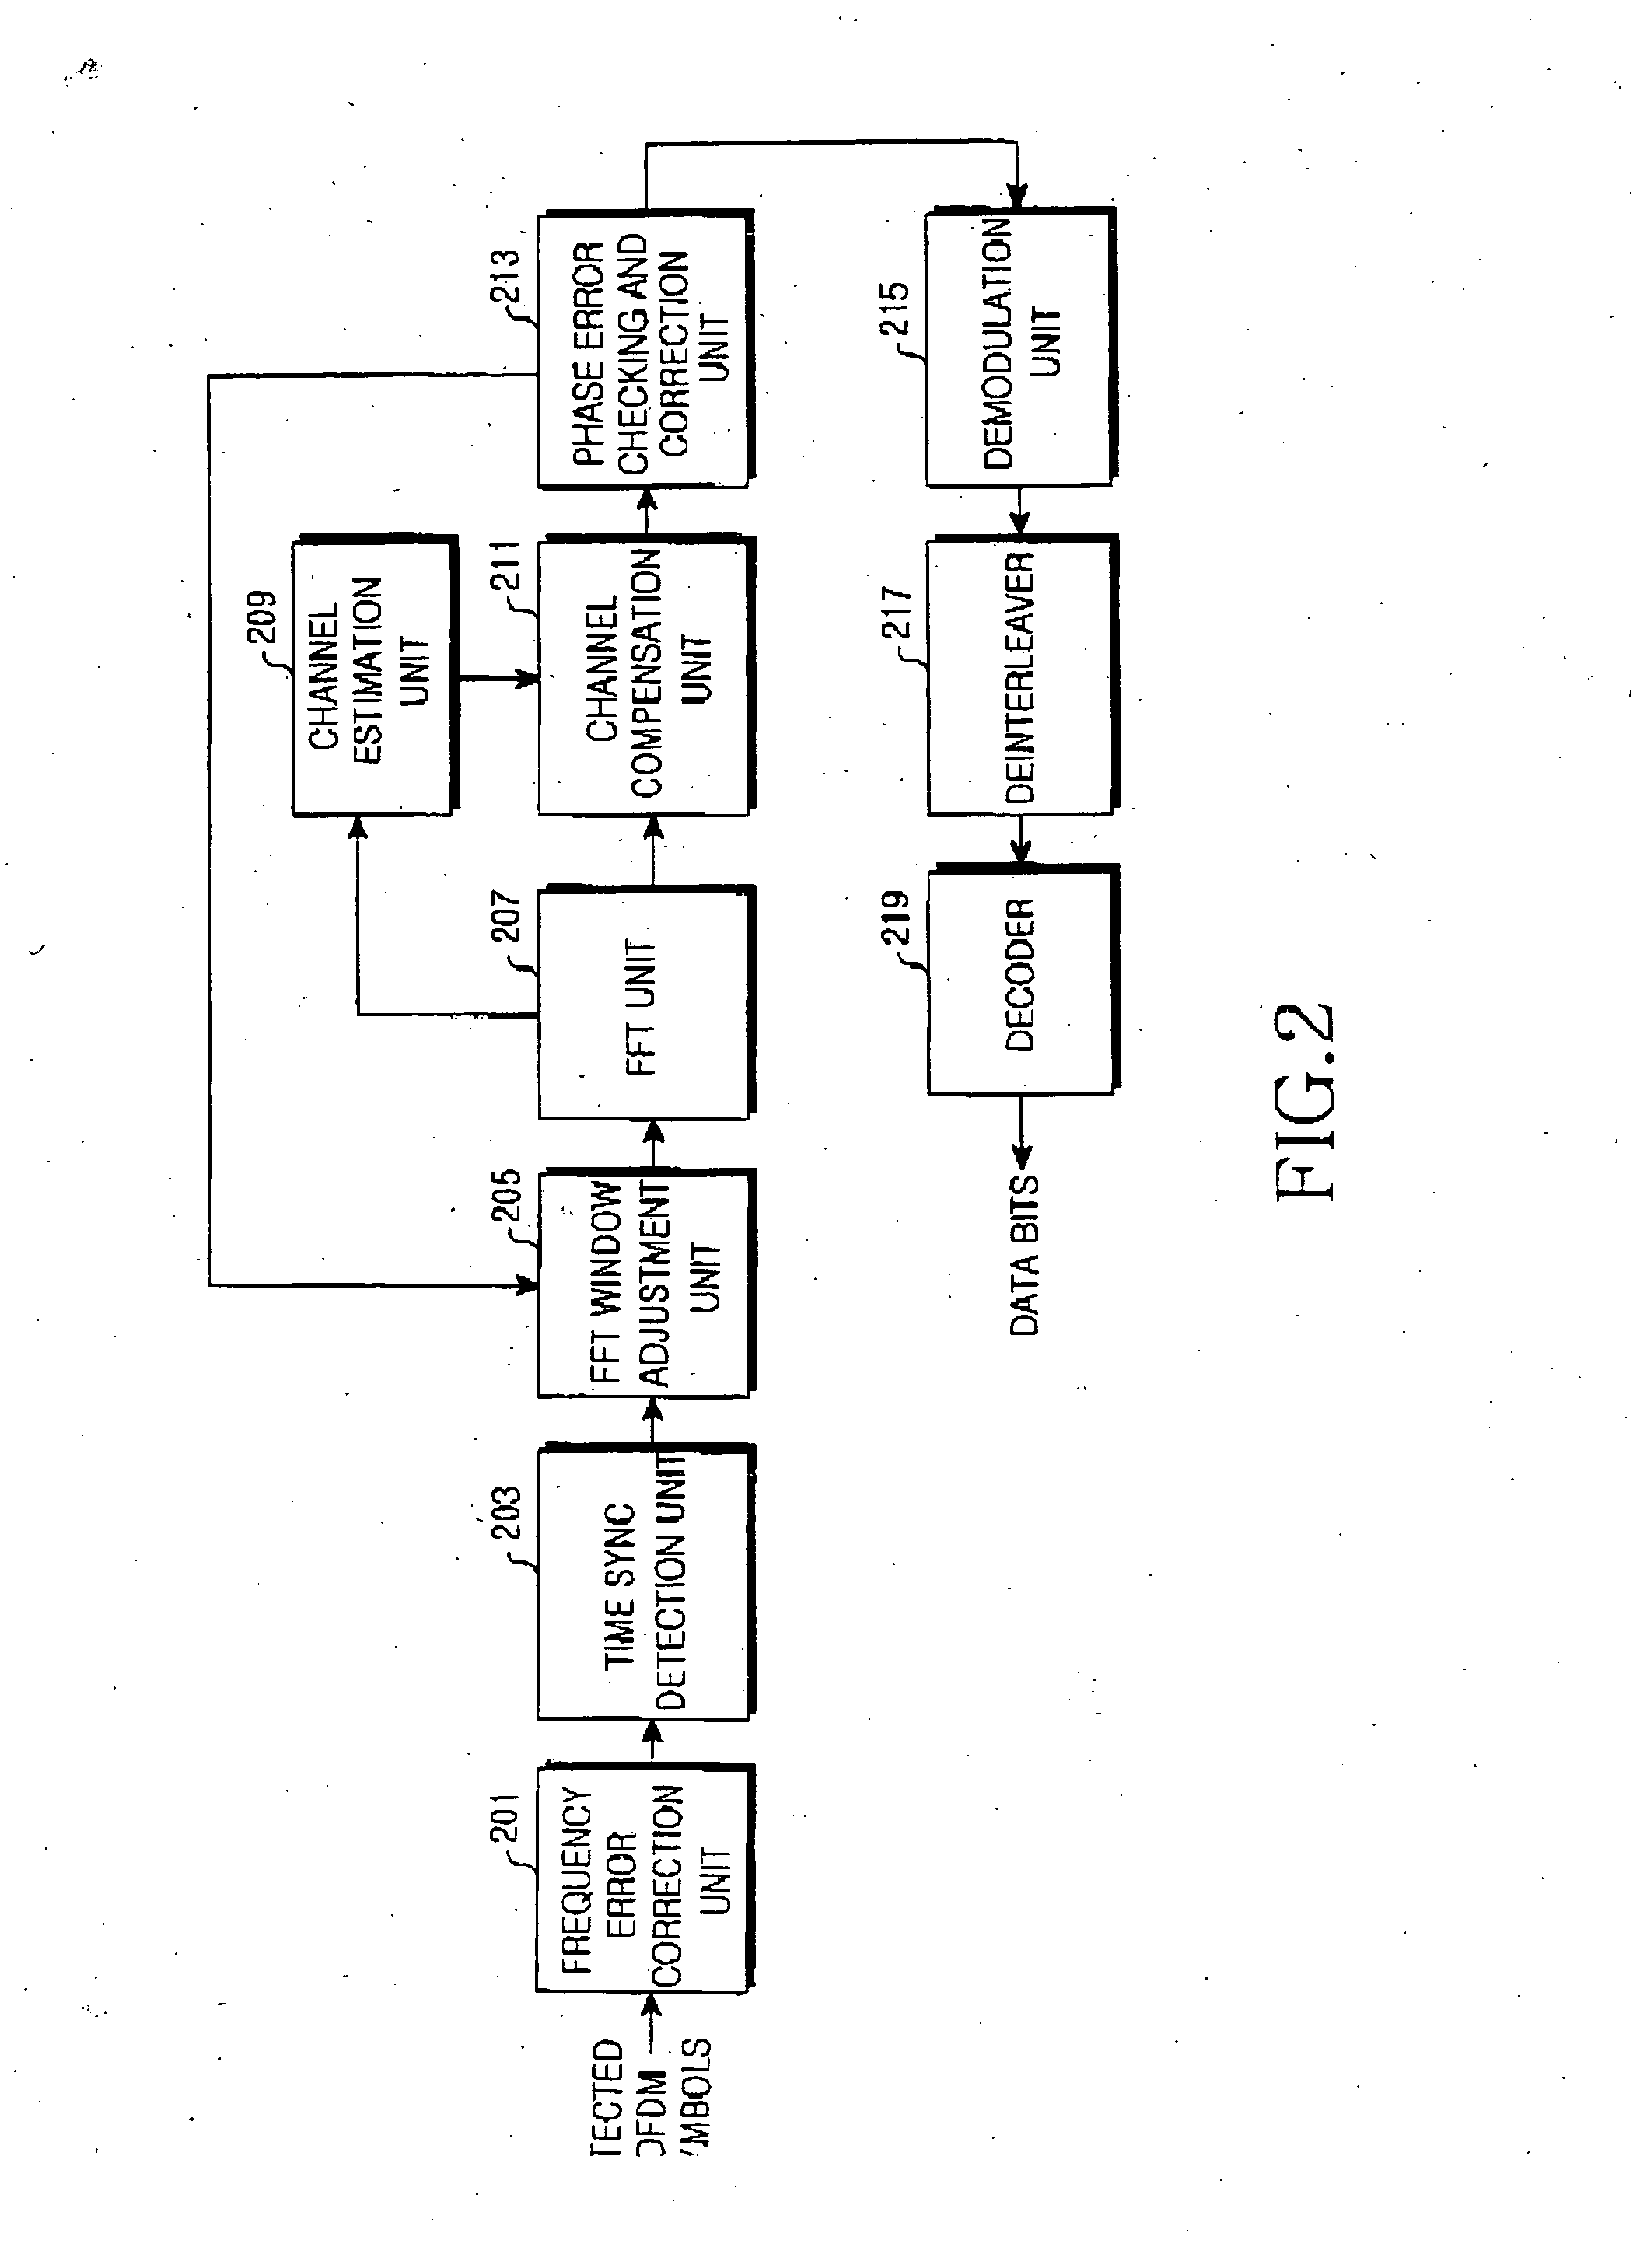 Apparatus and method for compensating for frequency offset in wireless communication system